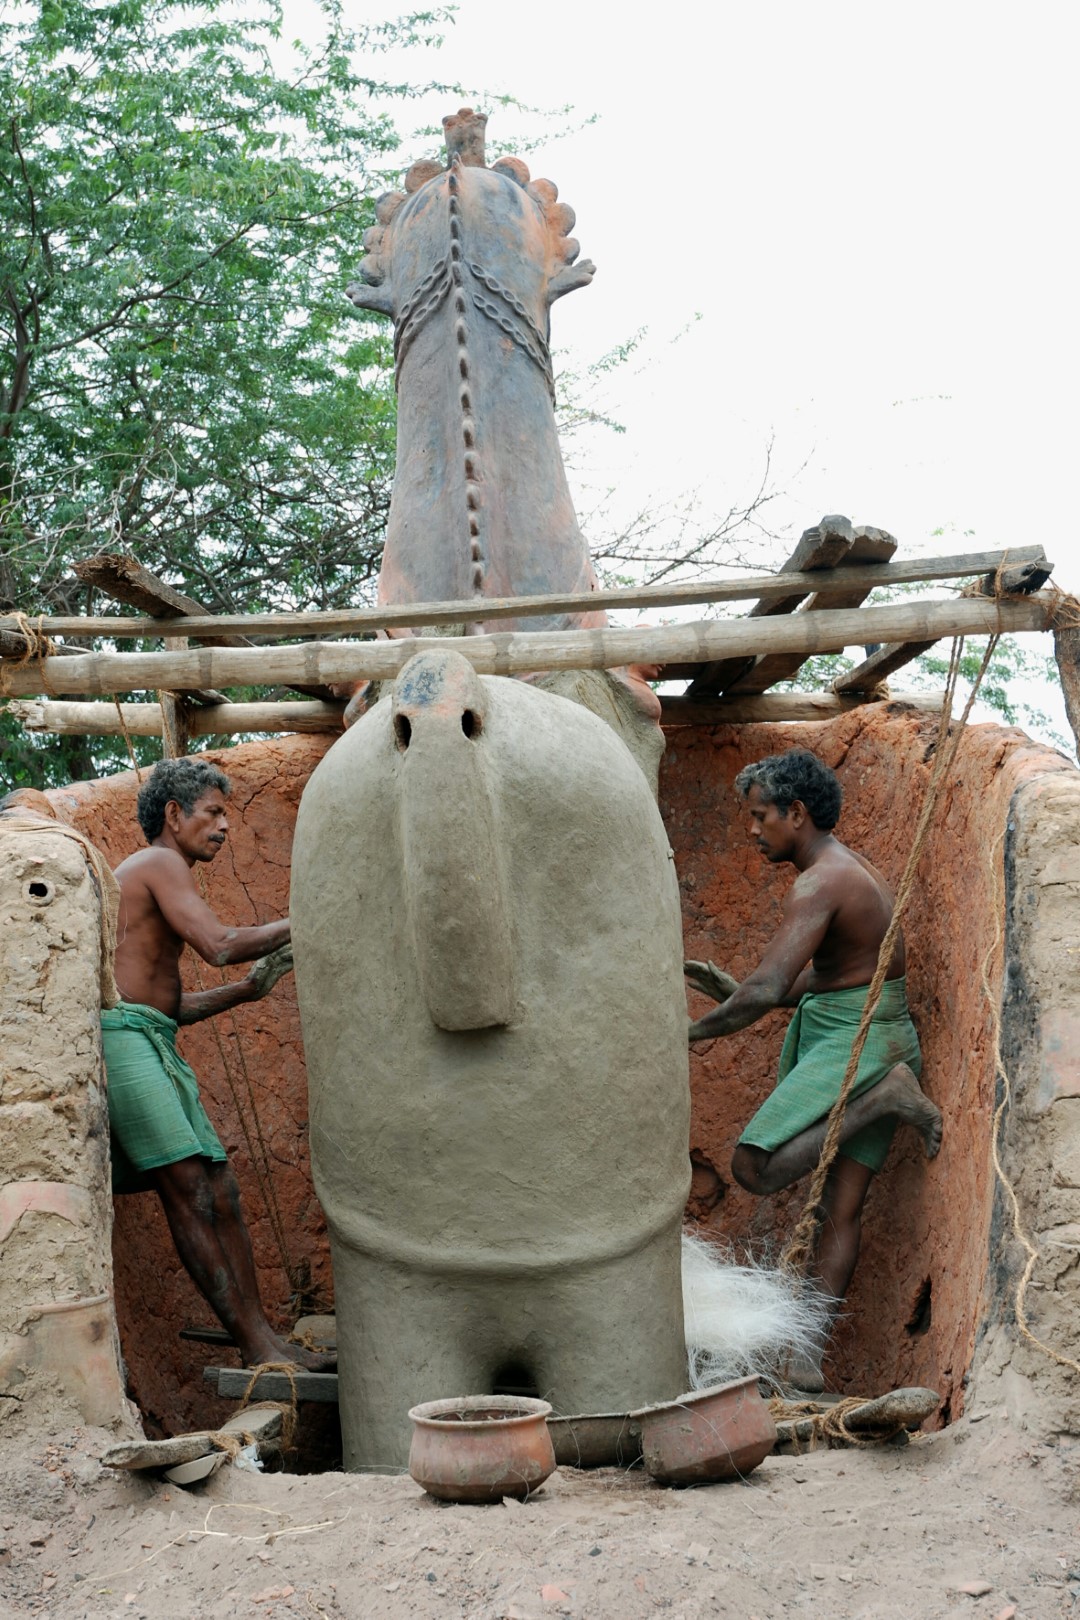 <span style="font-weight:normal;">After baking and before the first coat of white-lime is applied, this gigantic horse is given one last caress: its body and legs are covered with a mixture of wet mud and banana fibre, reinforcing it for its journey to the shrine using long bamboo poles tied to its haunches.</span>